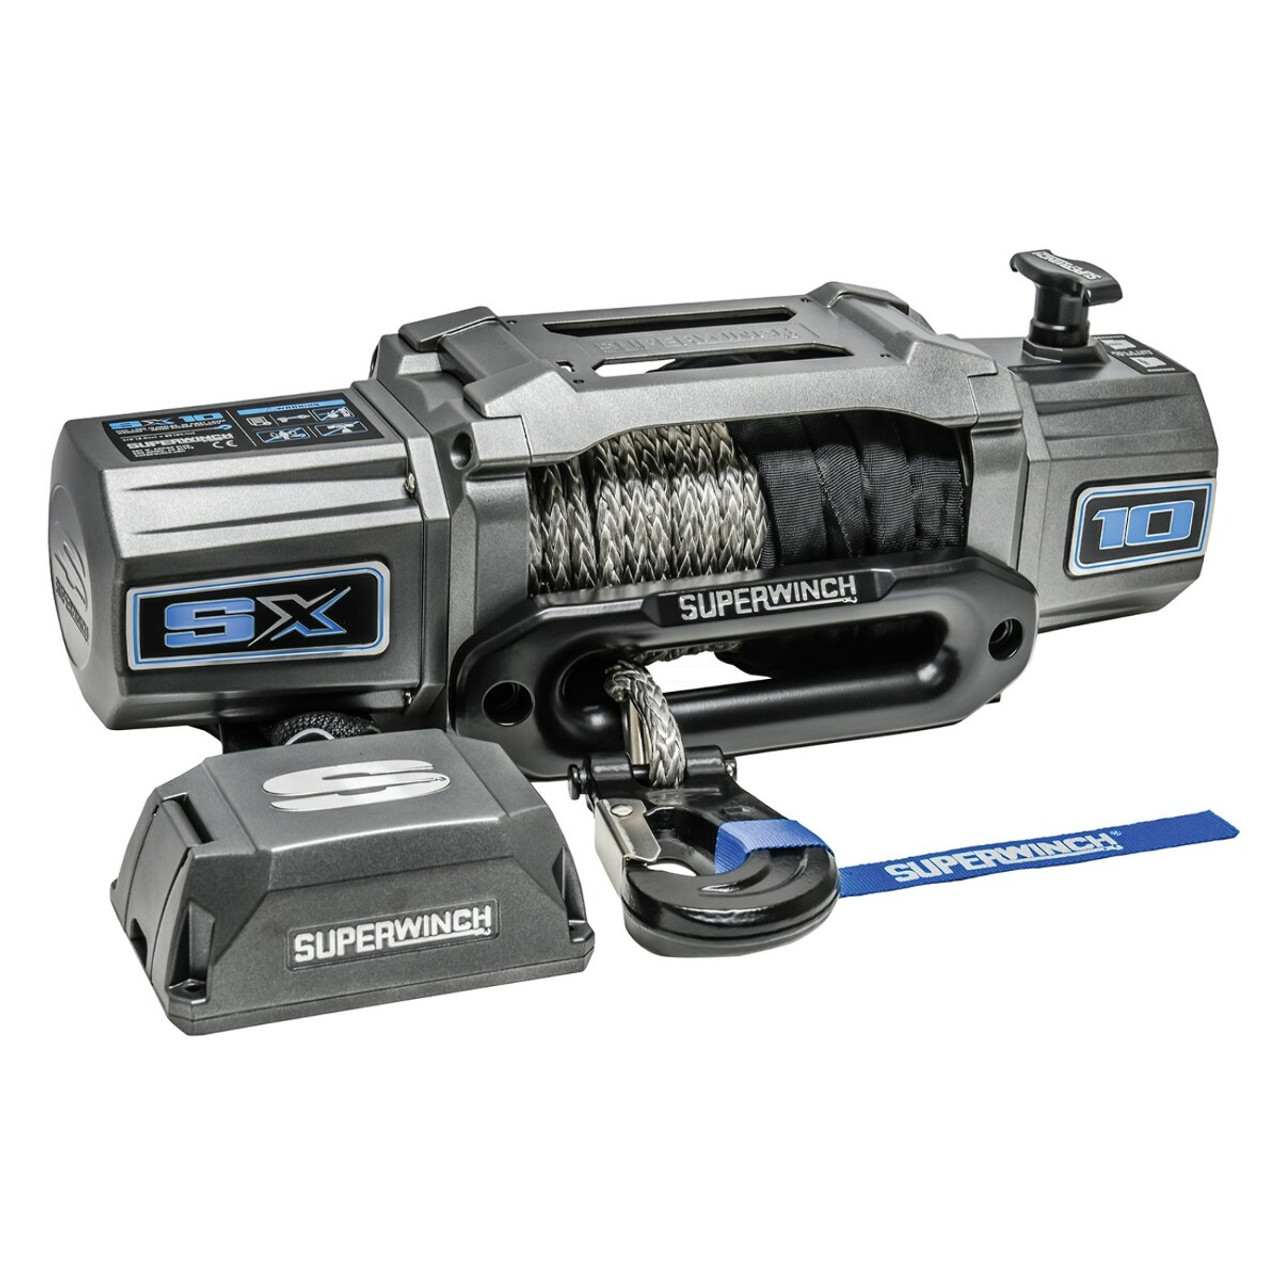 Superwinch SX10SR Synthetic Rope Winch 5.5 HP 10,000 lbs w Remote  1710201